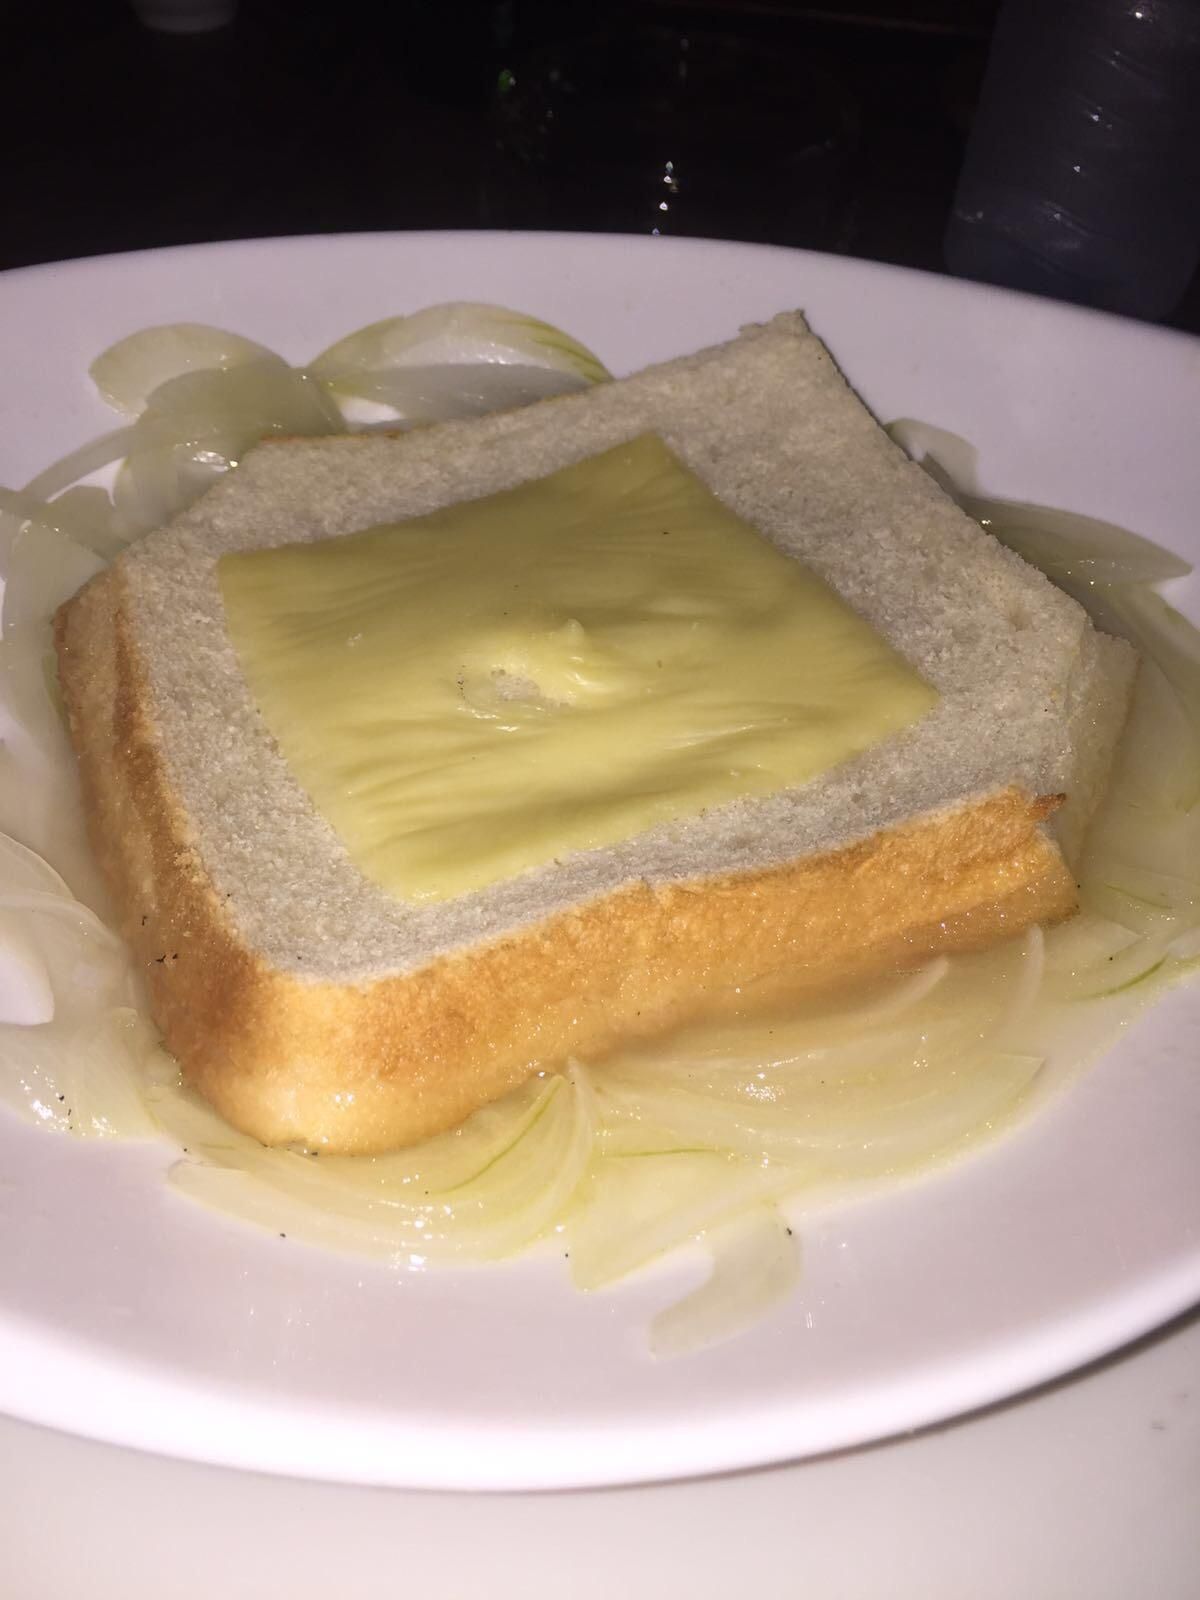 Never order French Onion Soup in Thailand